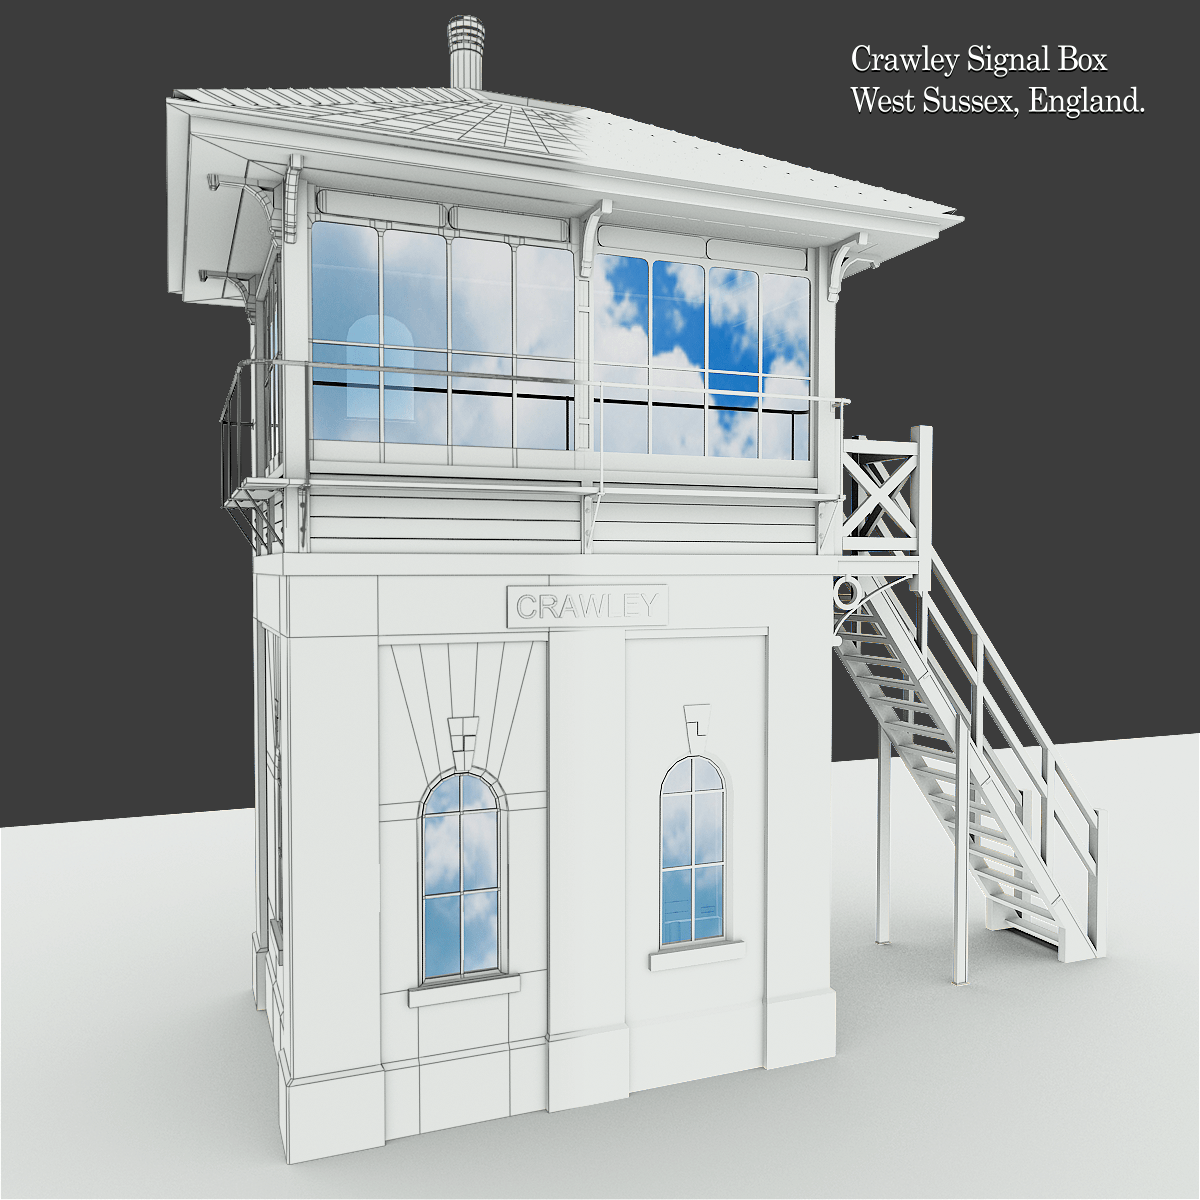 3ds max bells reaper 3D Modelling Low Poly mechanical locomotive train signal box drill